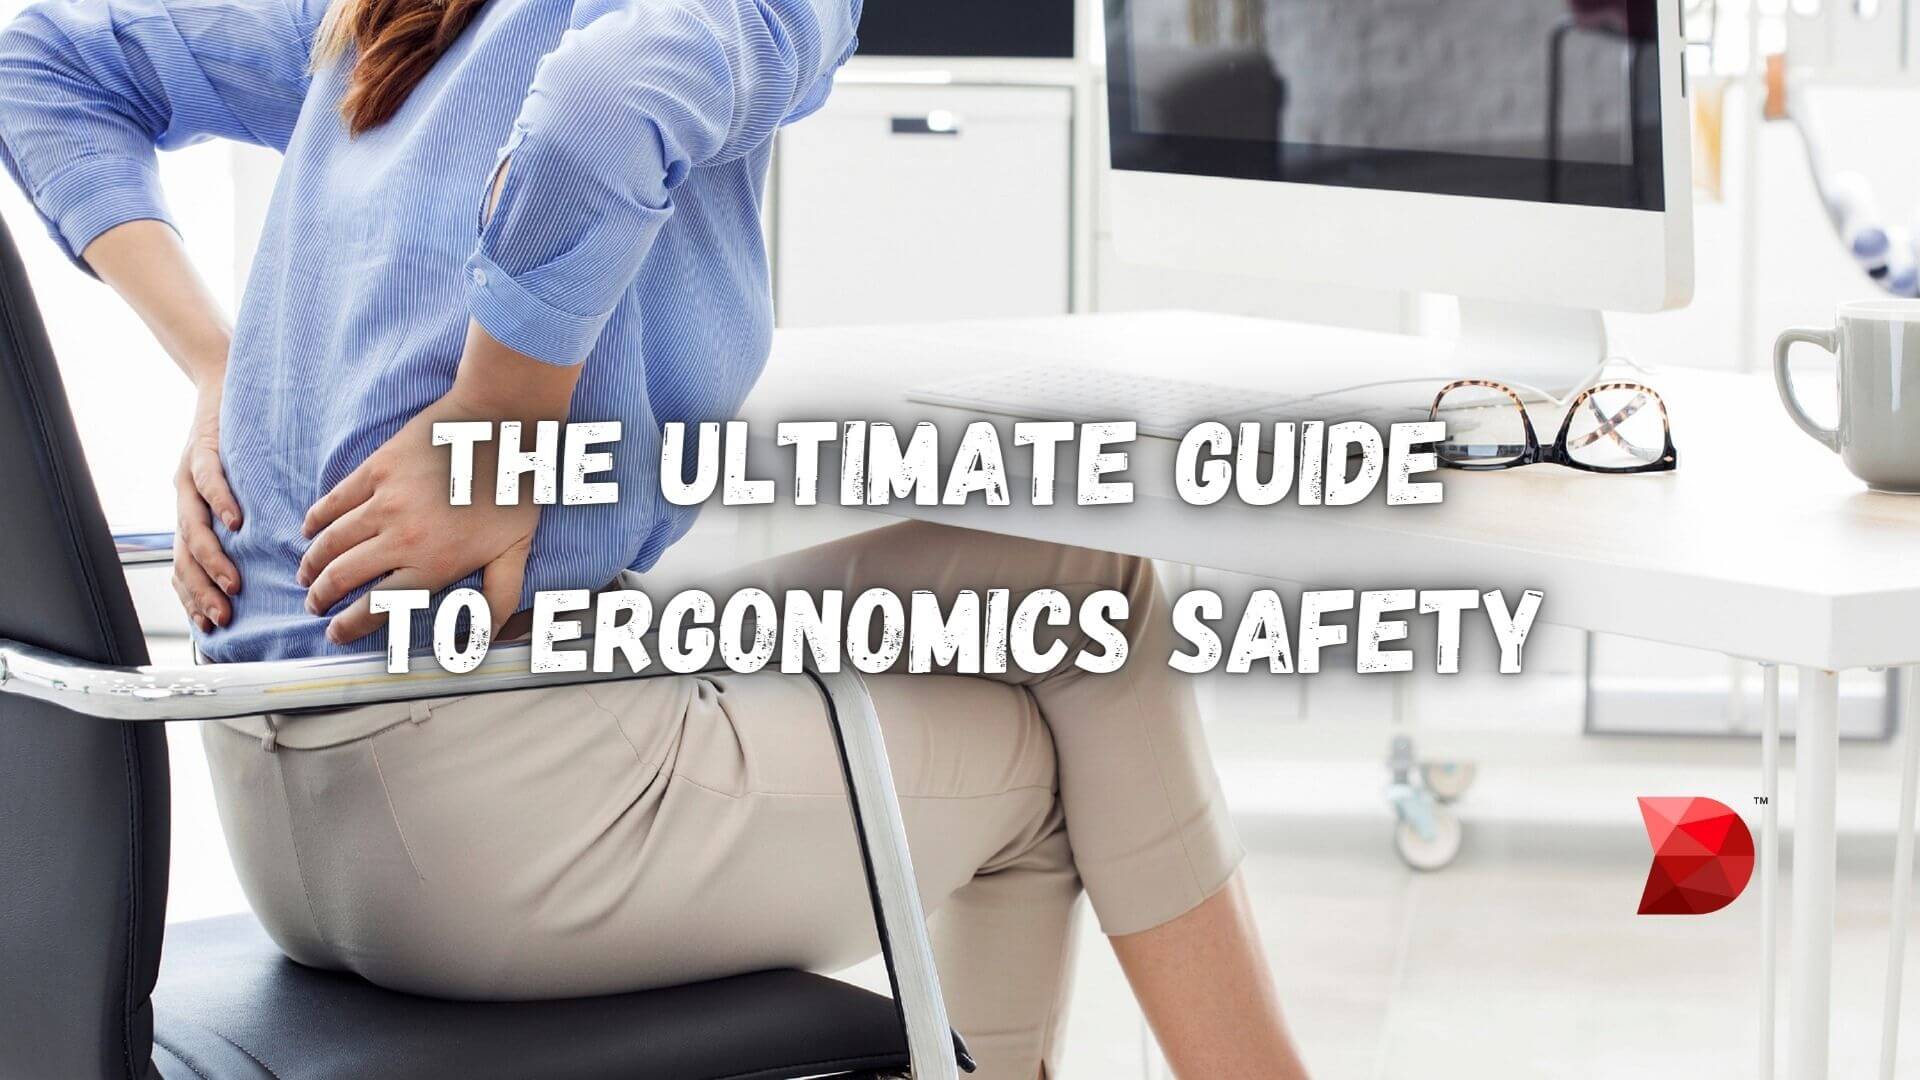 The Ultimate Guide to Ergonomics Safety